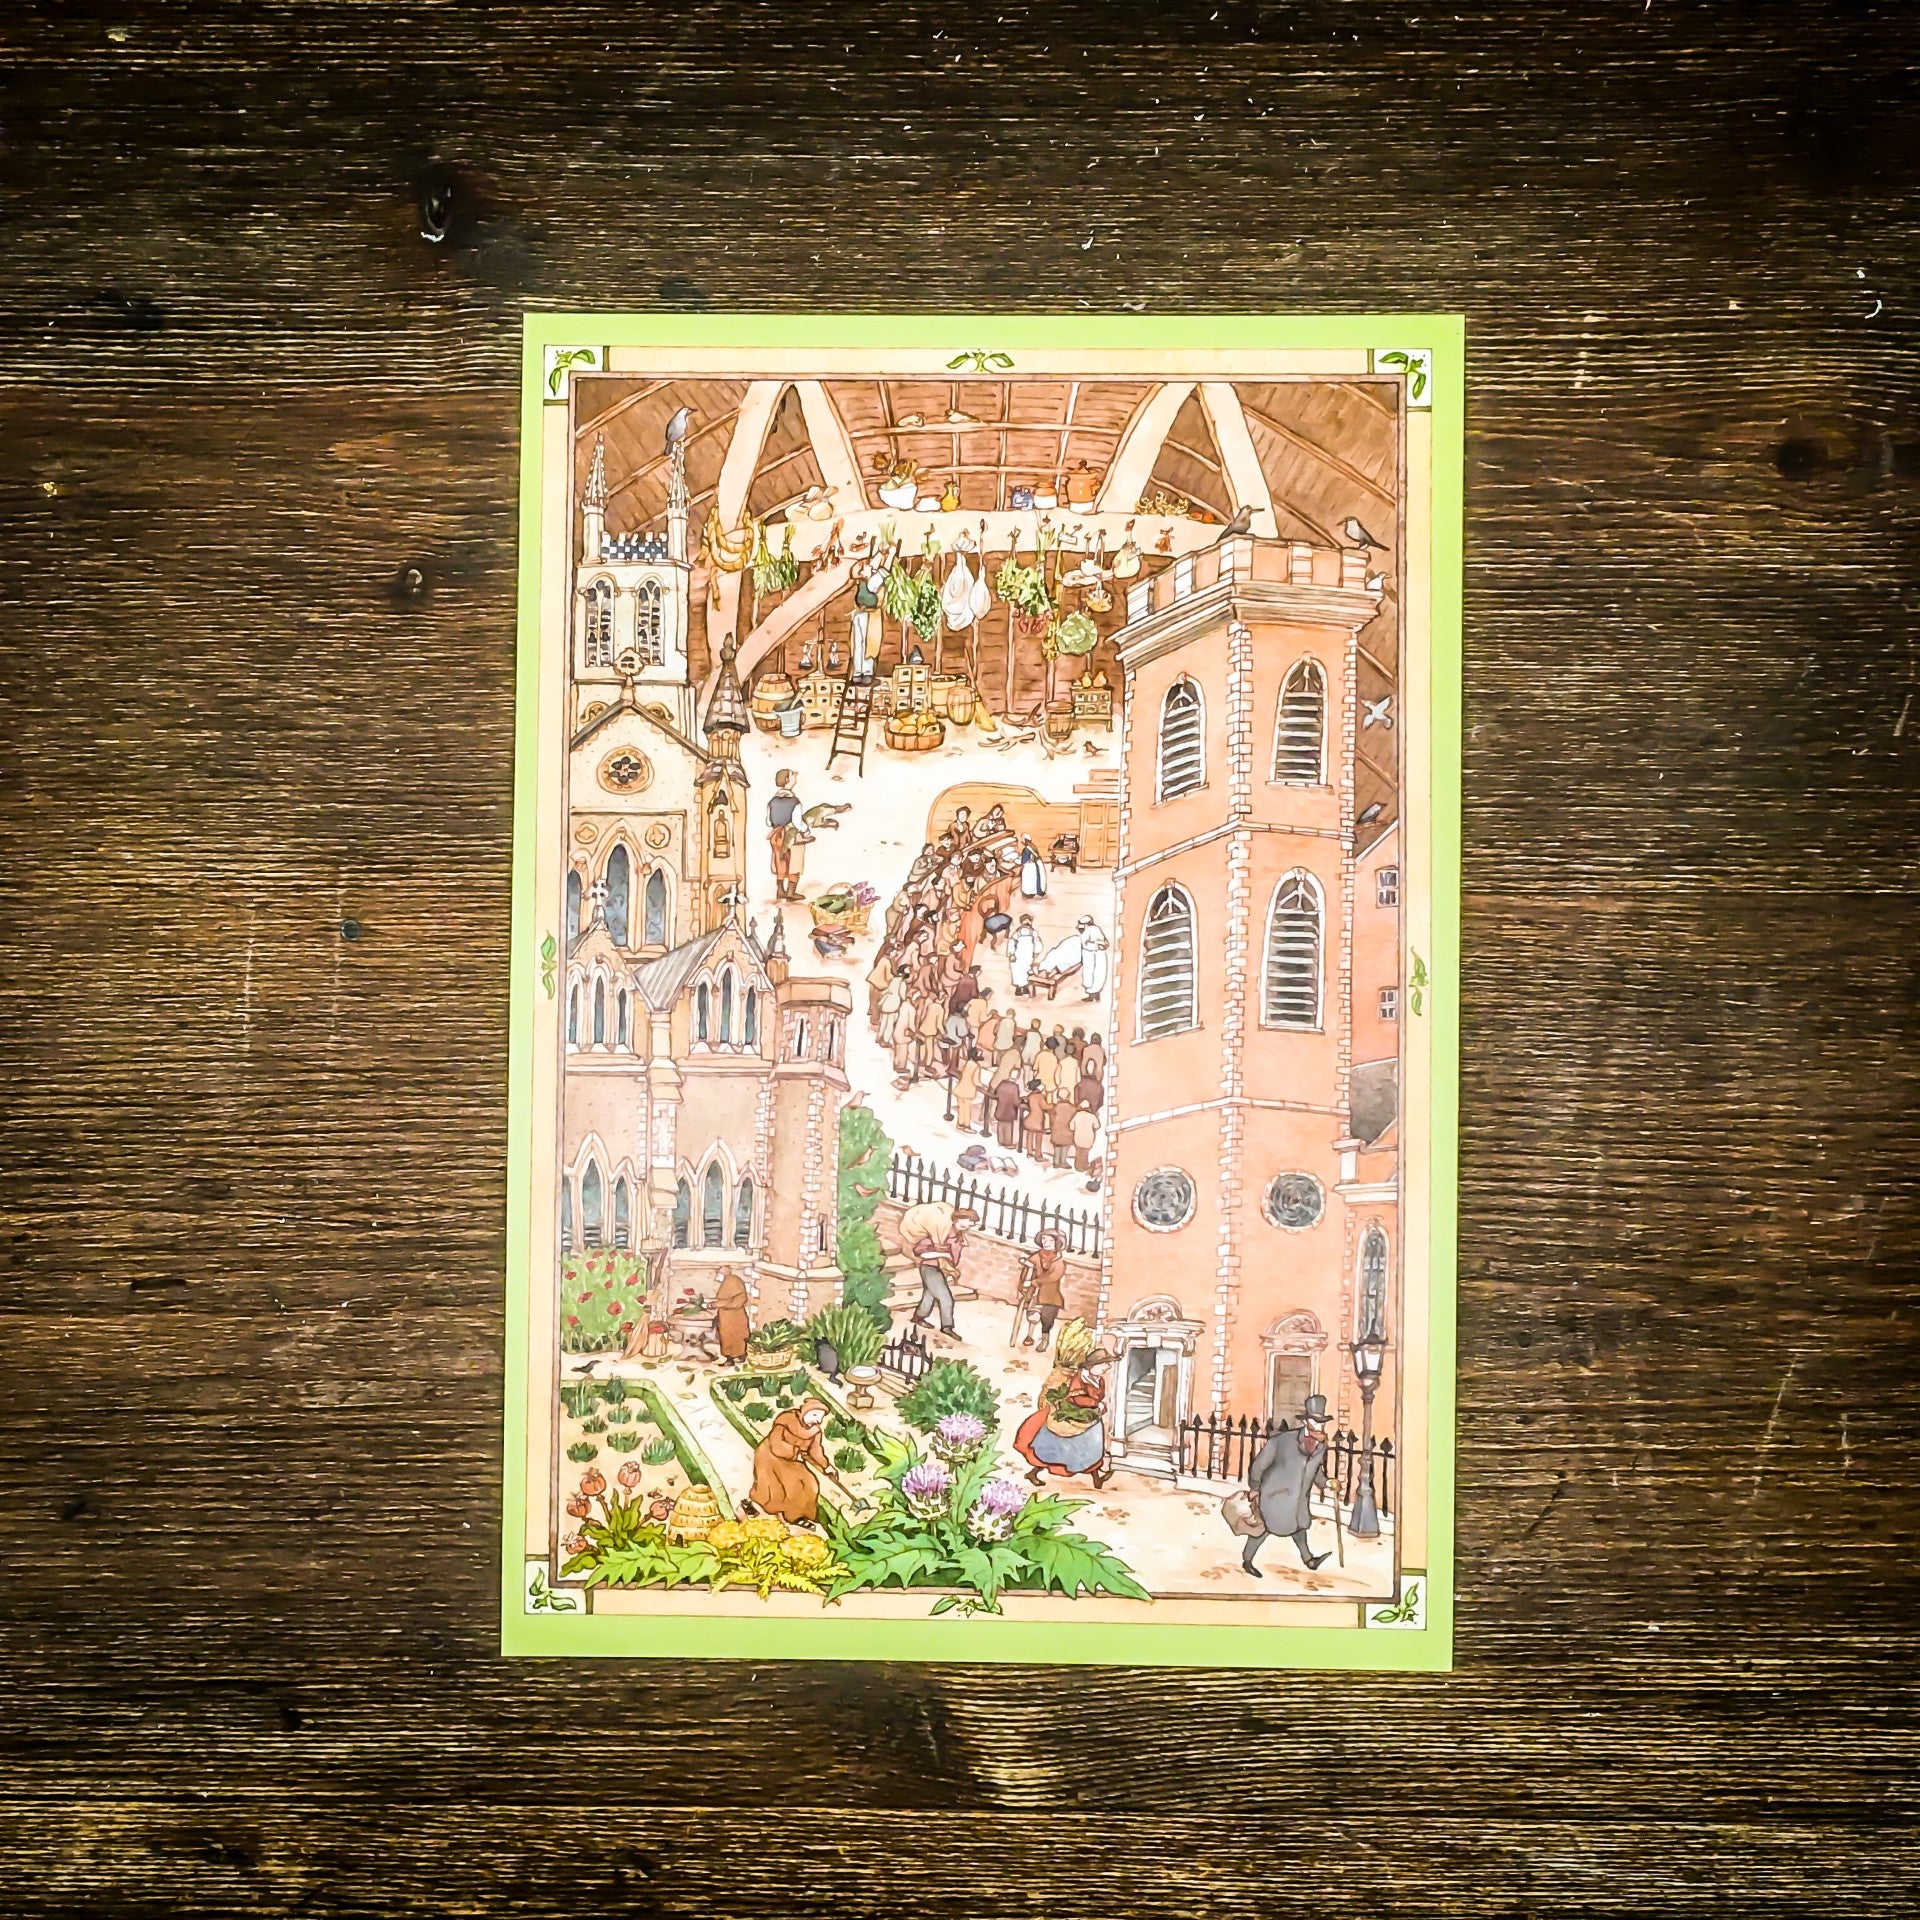 A card on a wooden surface with the design with the museum's building, interior and surroundings